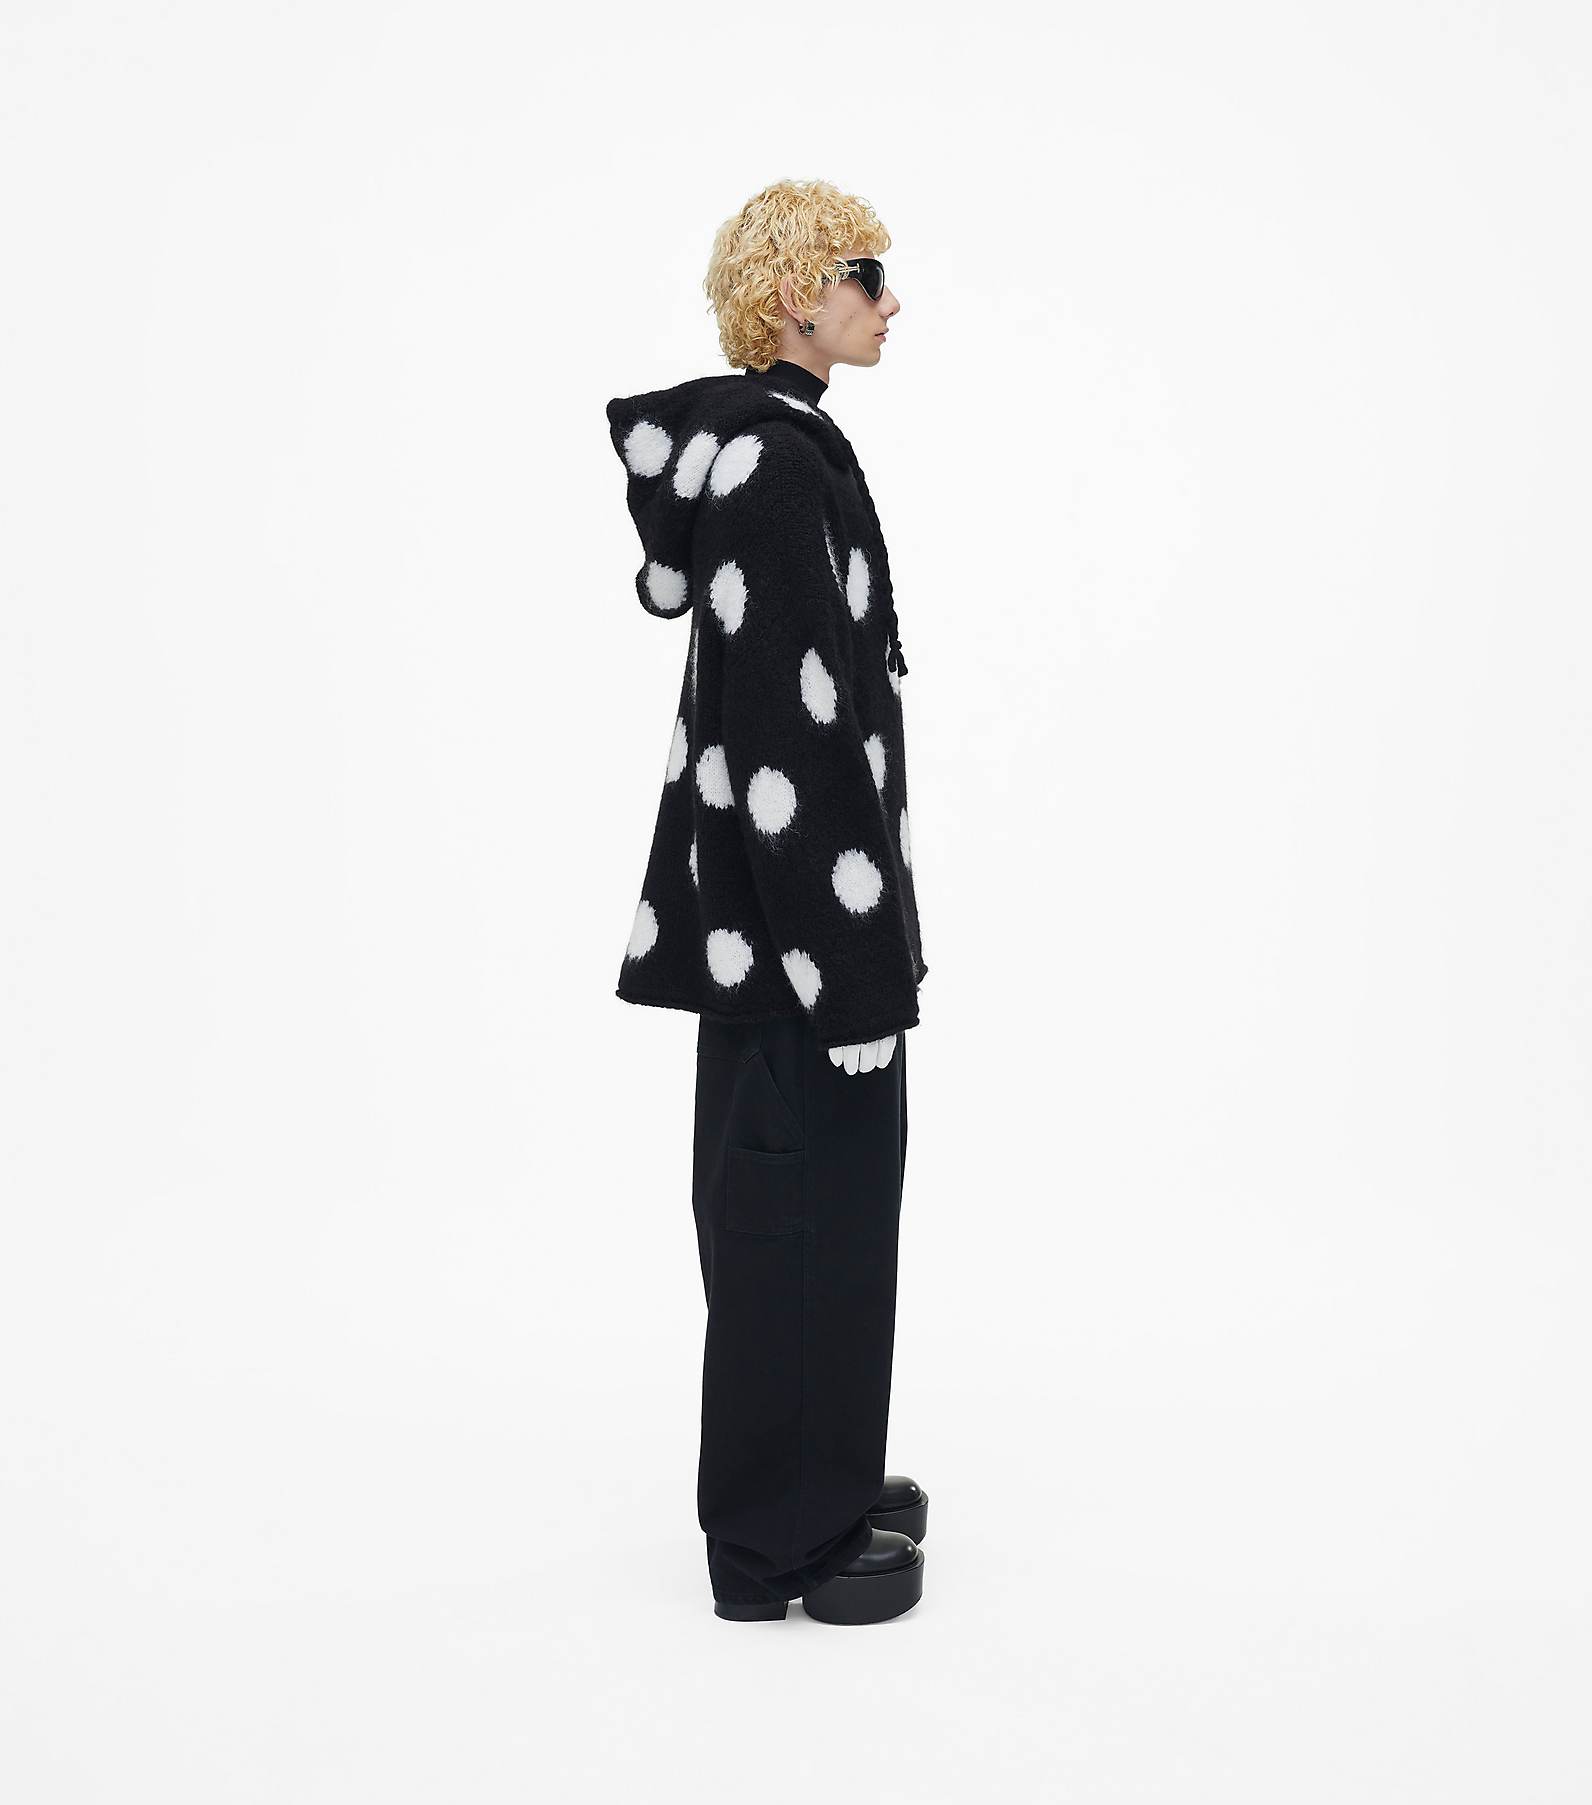 The Brushed Spots Knit Hoodie(null)